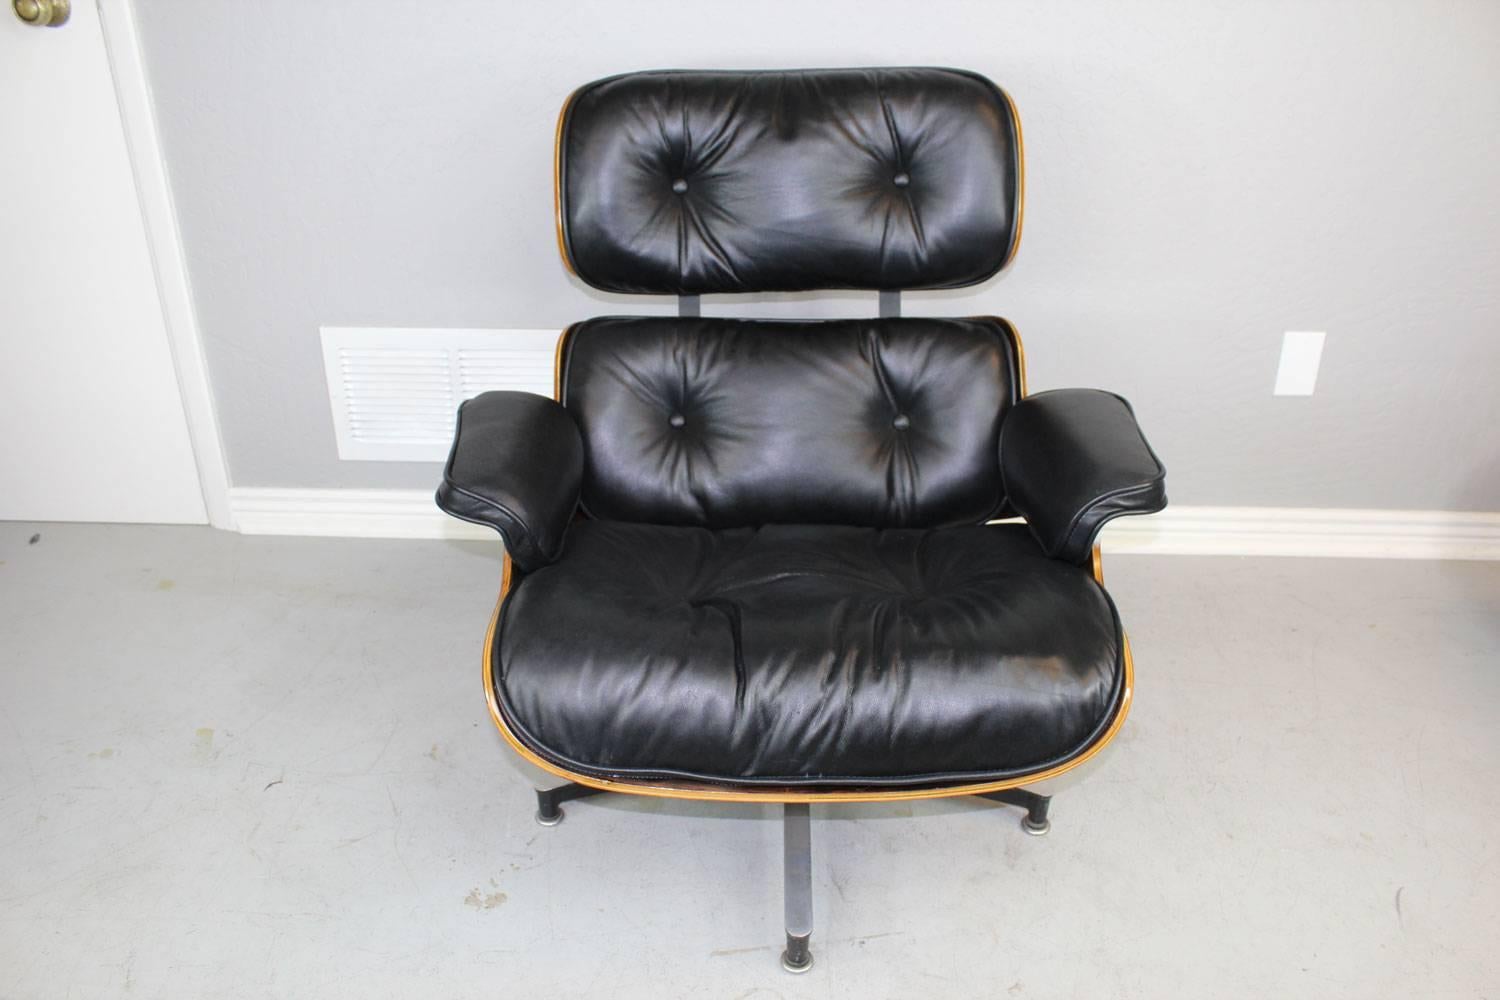 This is an exceptional black leather and dark wood 670 lounge chair and 671 ottoman designed, circa 1960s by Charles and Ray Eames and manufactured by Herman Miller. The rosewood has been professionally restored and reupholstered in a very high